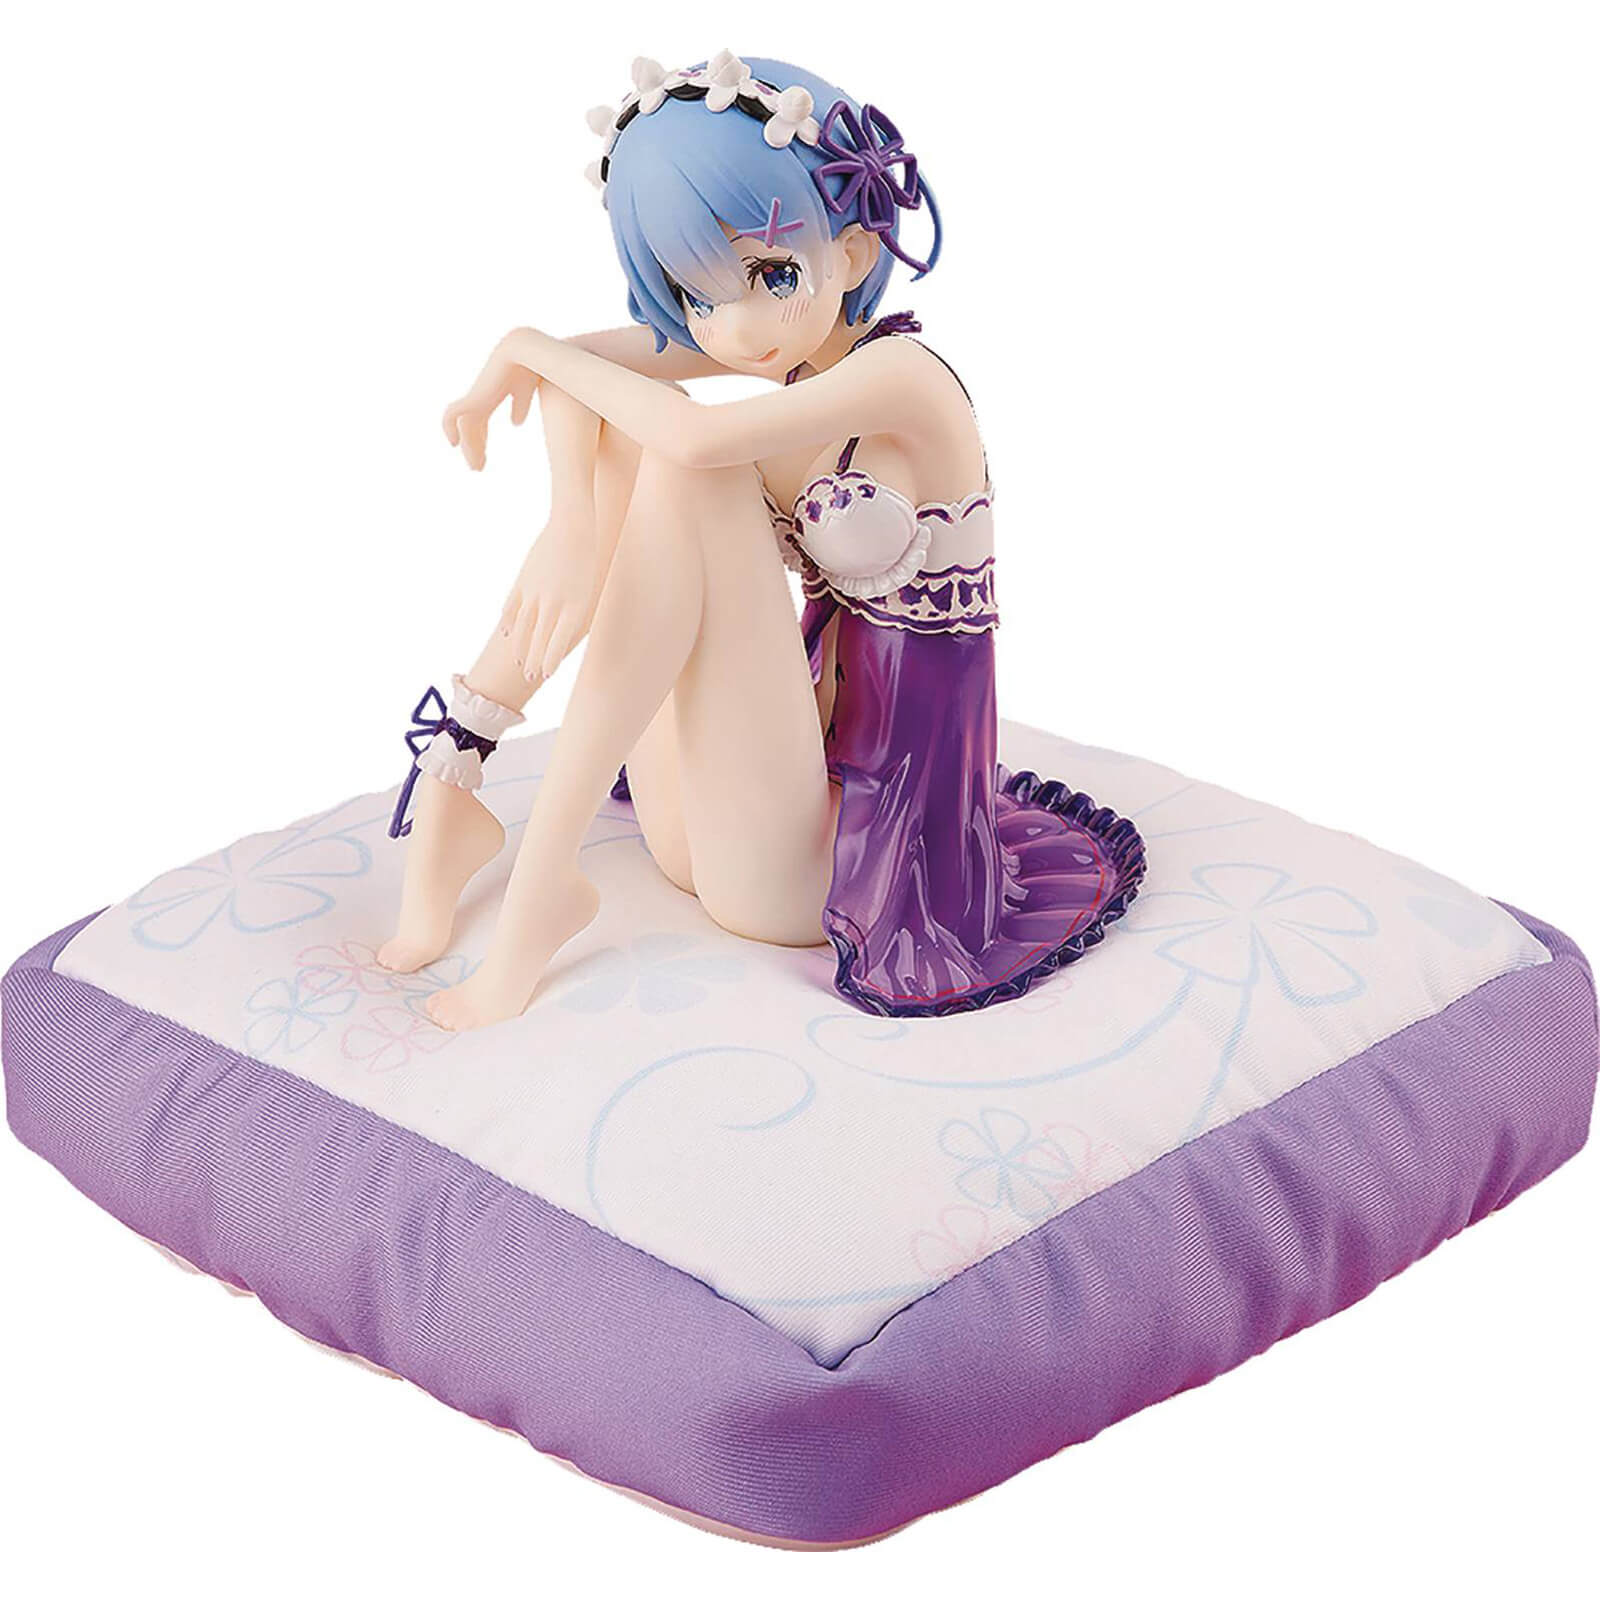 Re:Zero - Starting Life in Another World 1/7 Scale PVC Figure - Rem (Birthday Purple Lingerie)